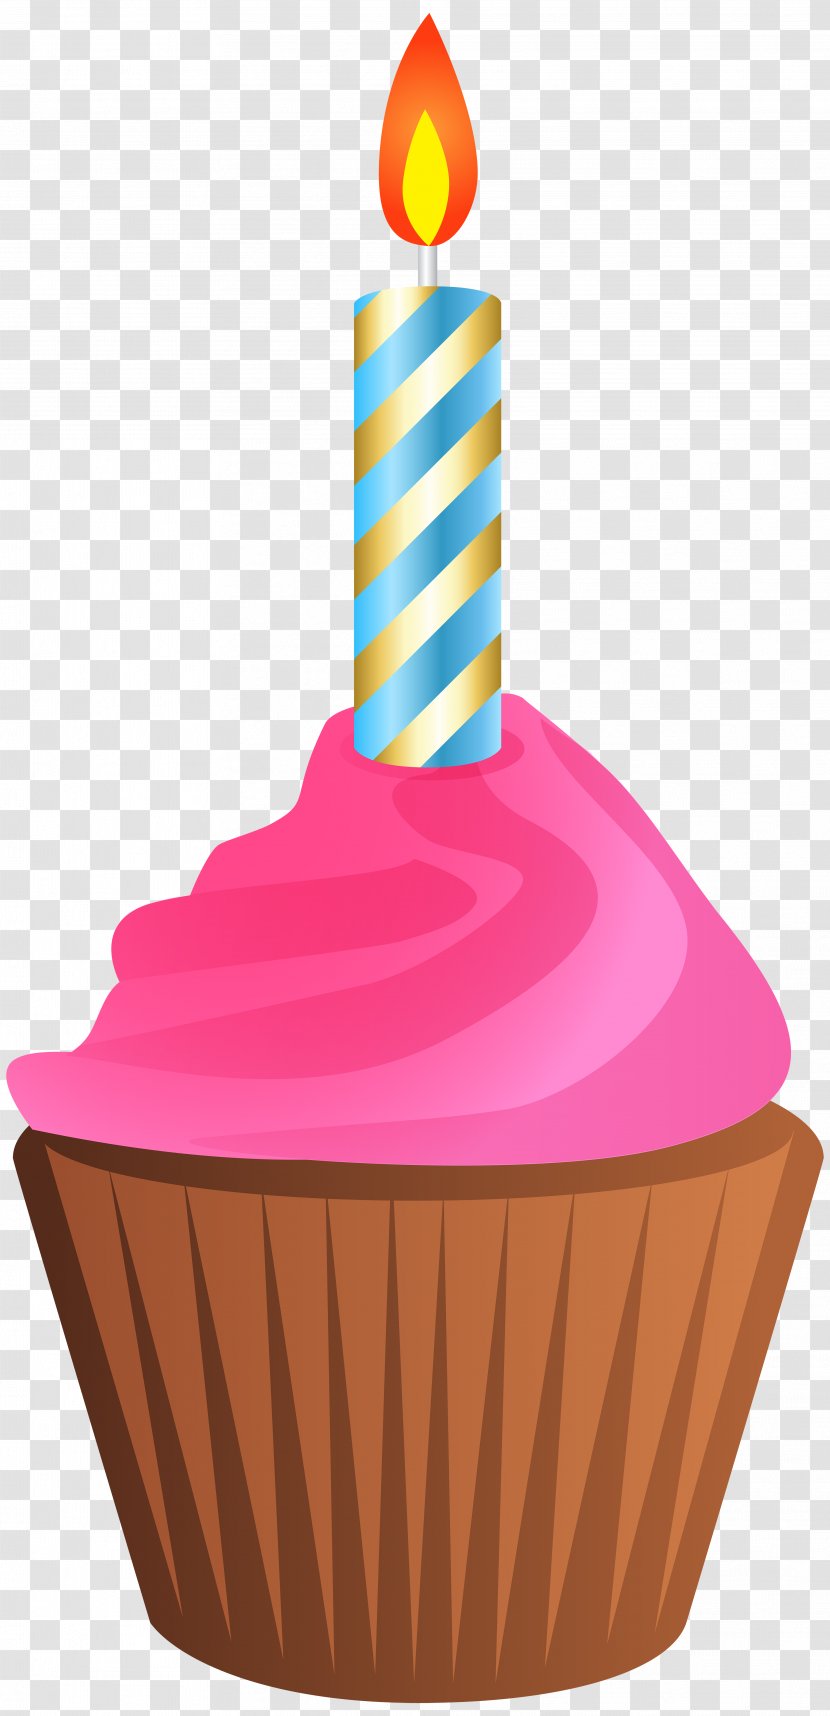 Birthday Cake Muffin Cupcake Clip Art - Candle Transparent PNG